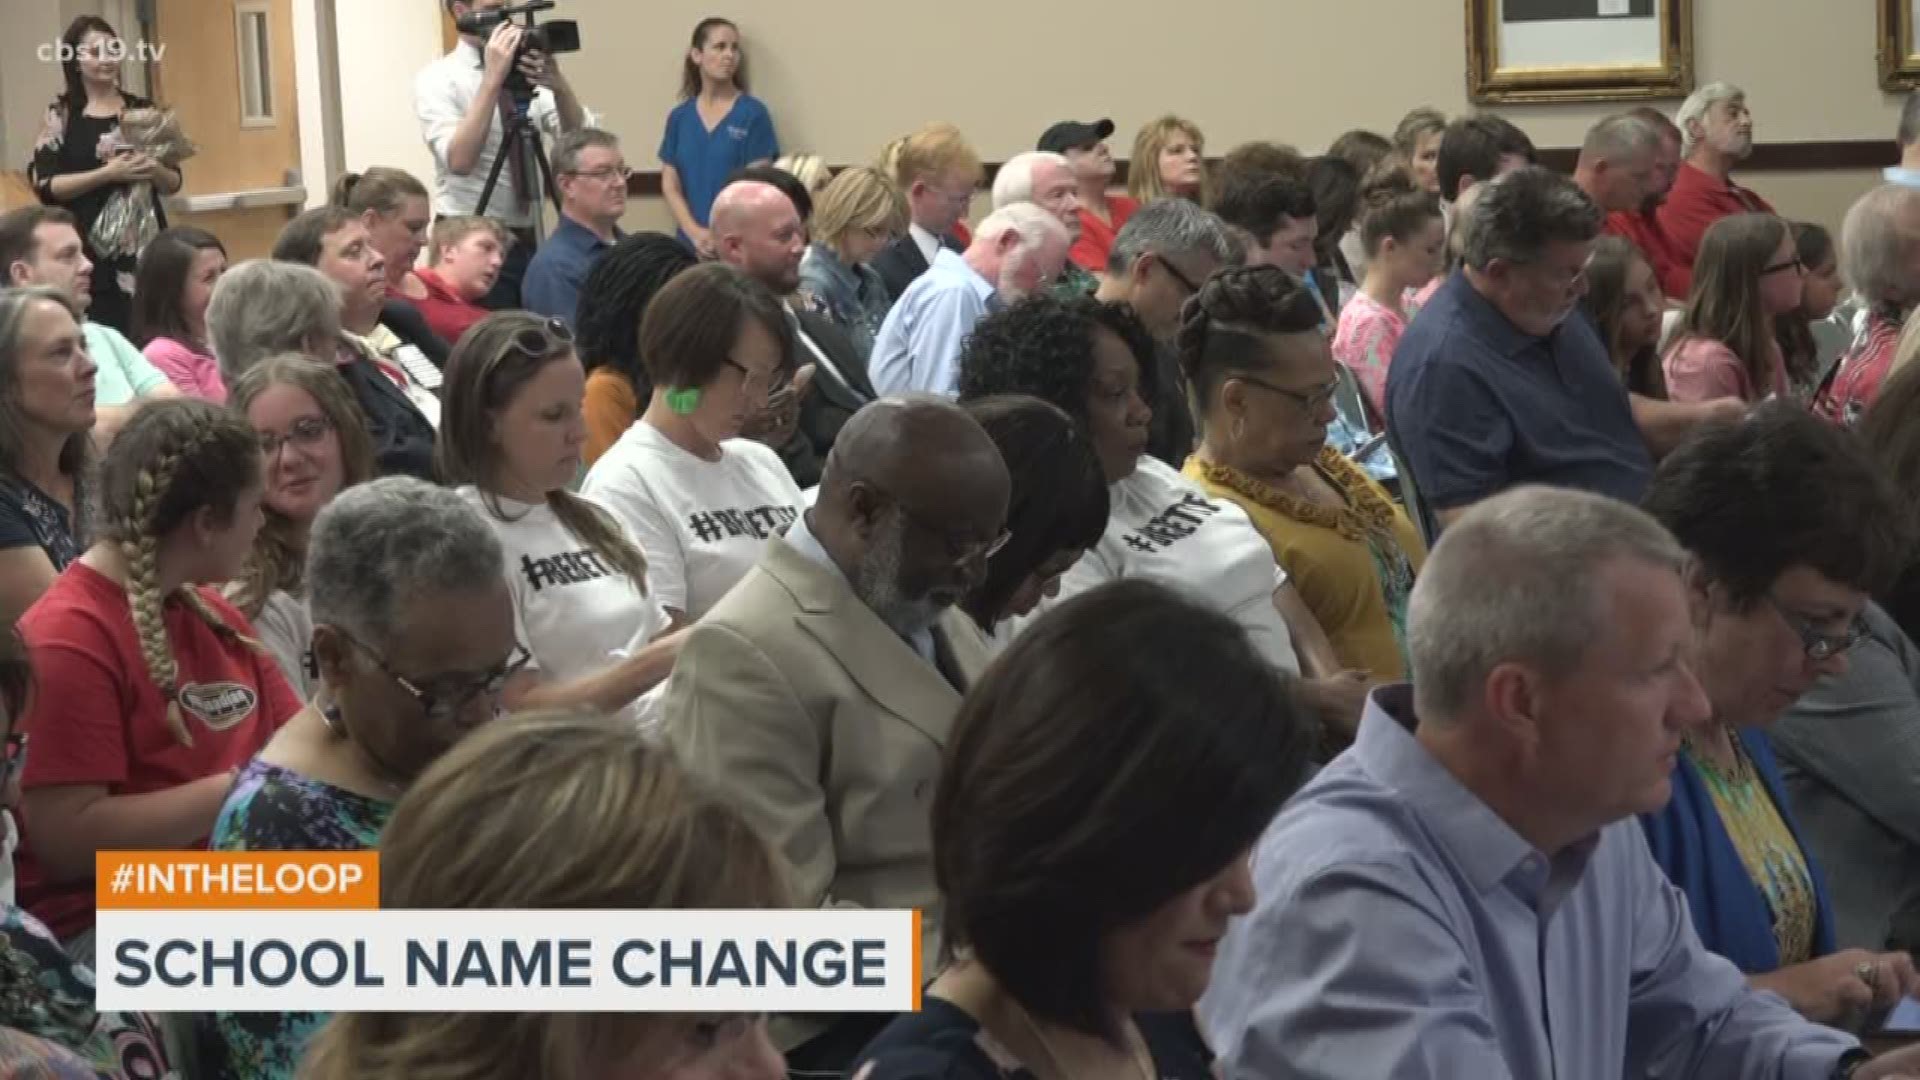 People for keeping the name Robert E. Lee high school weigh in on the discussion